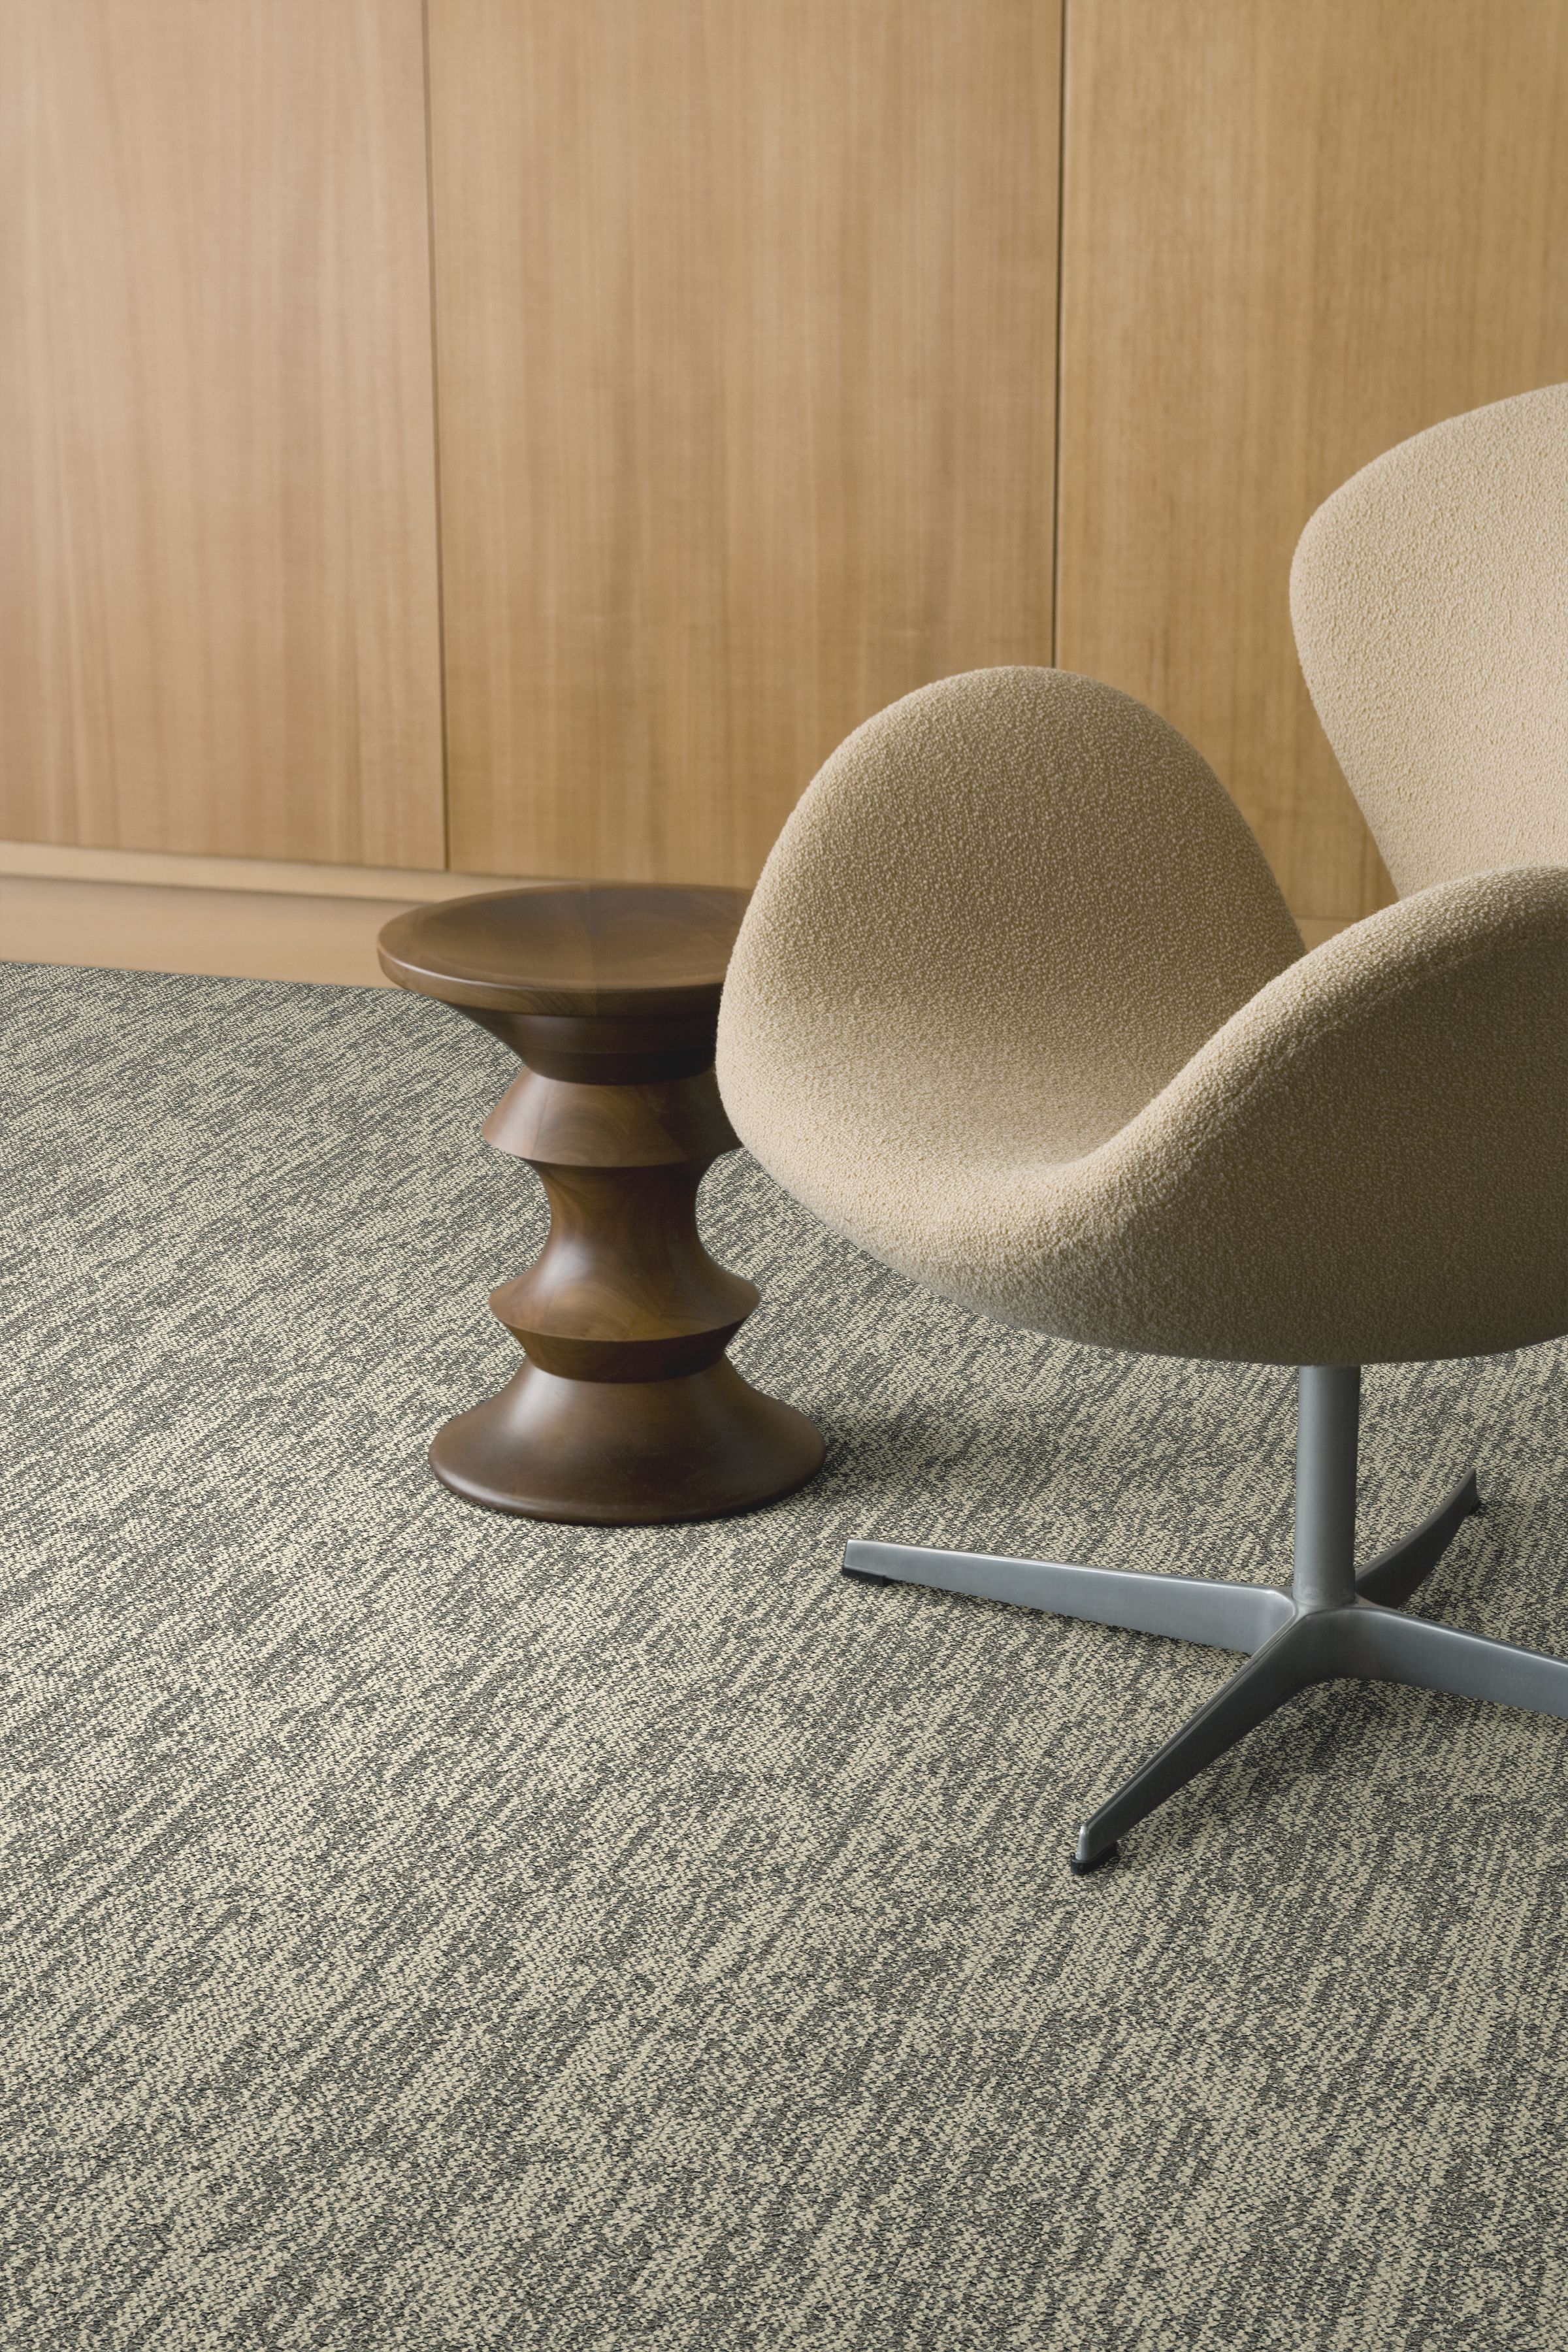 Interface Obligato plank carpet tile with textured fabric chair and small wooden art deco table imagen número 9